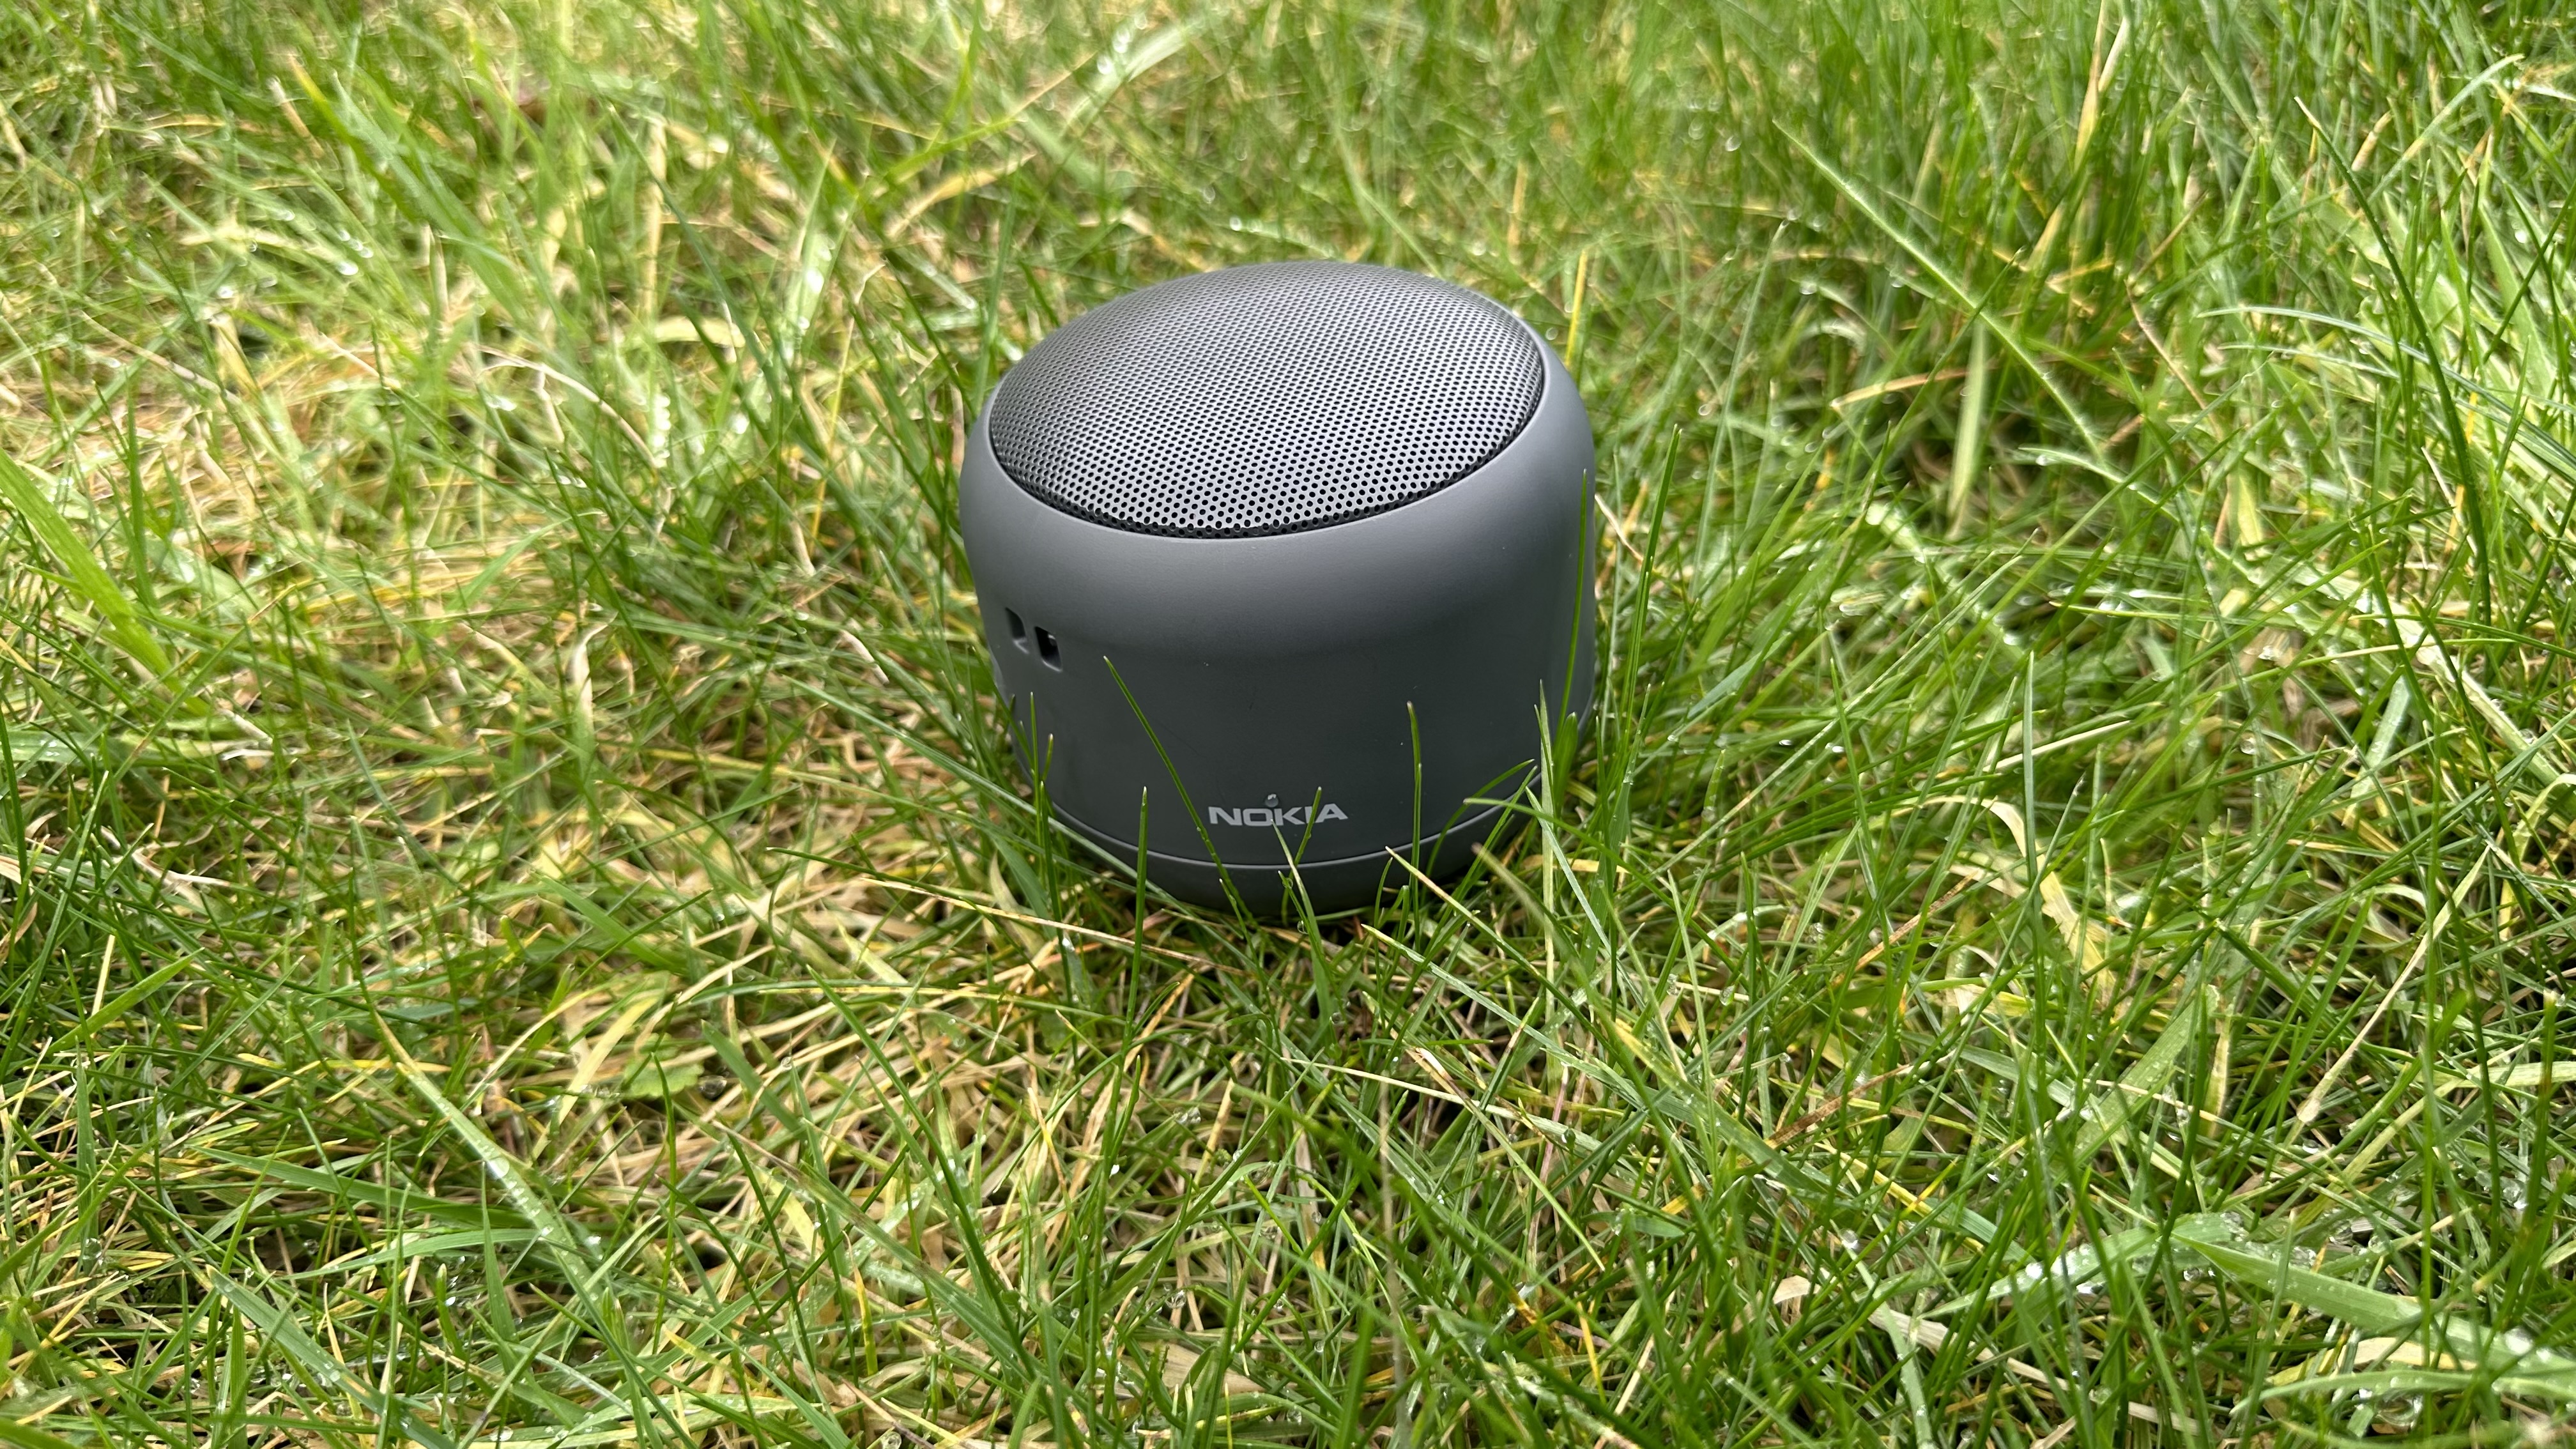 A picture of the Nokia Portable Wireless Speaker 2 among some grass.